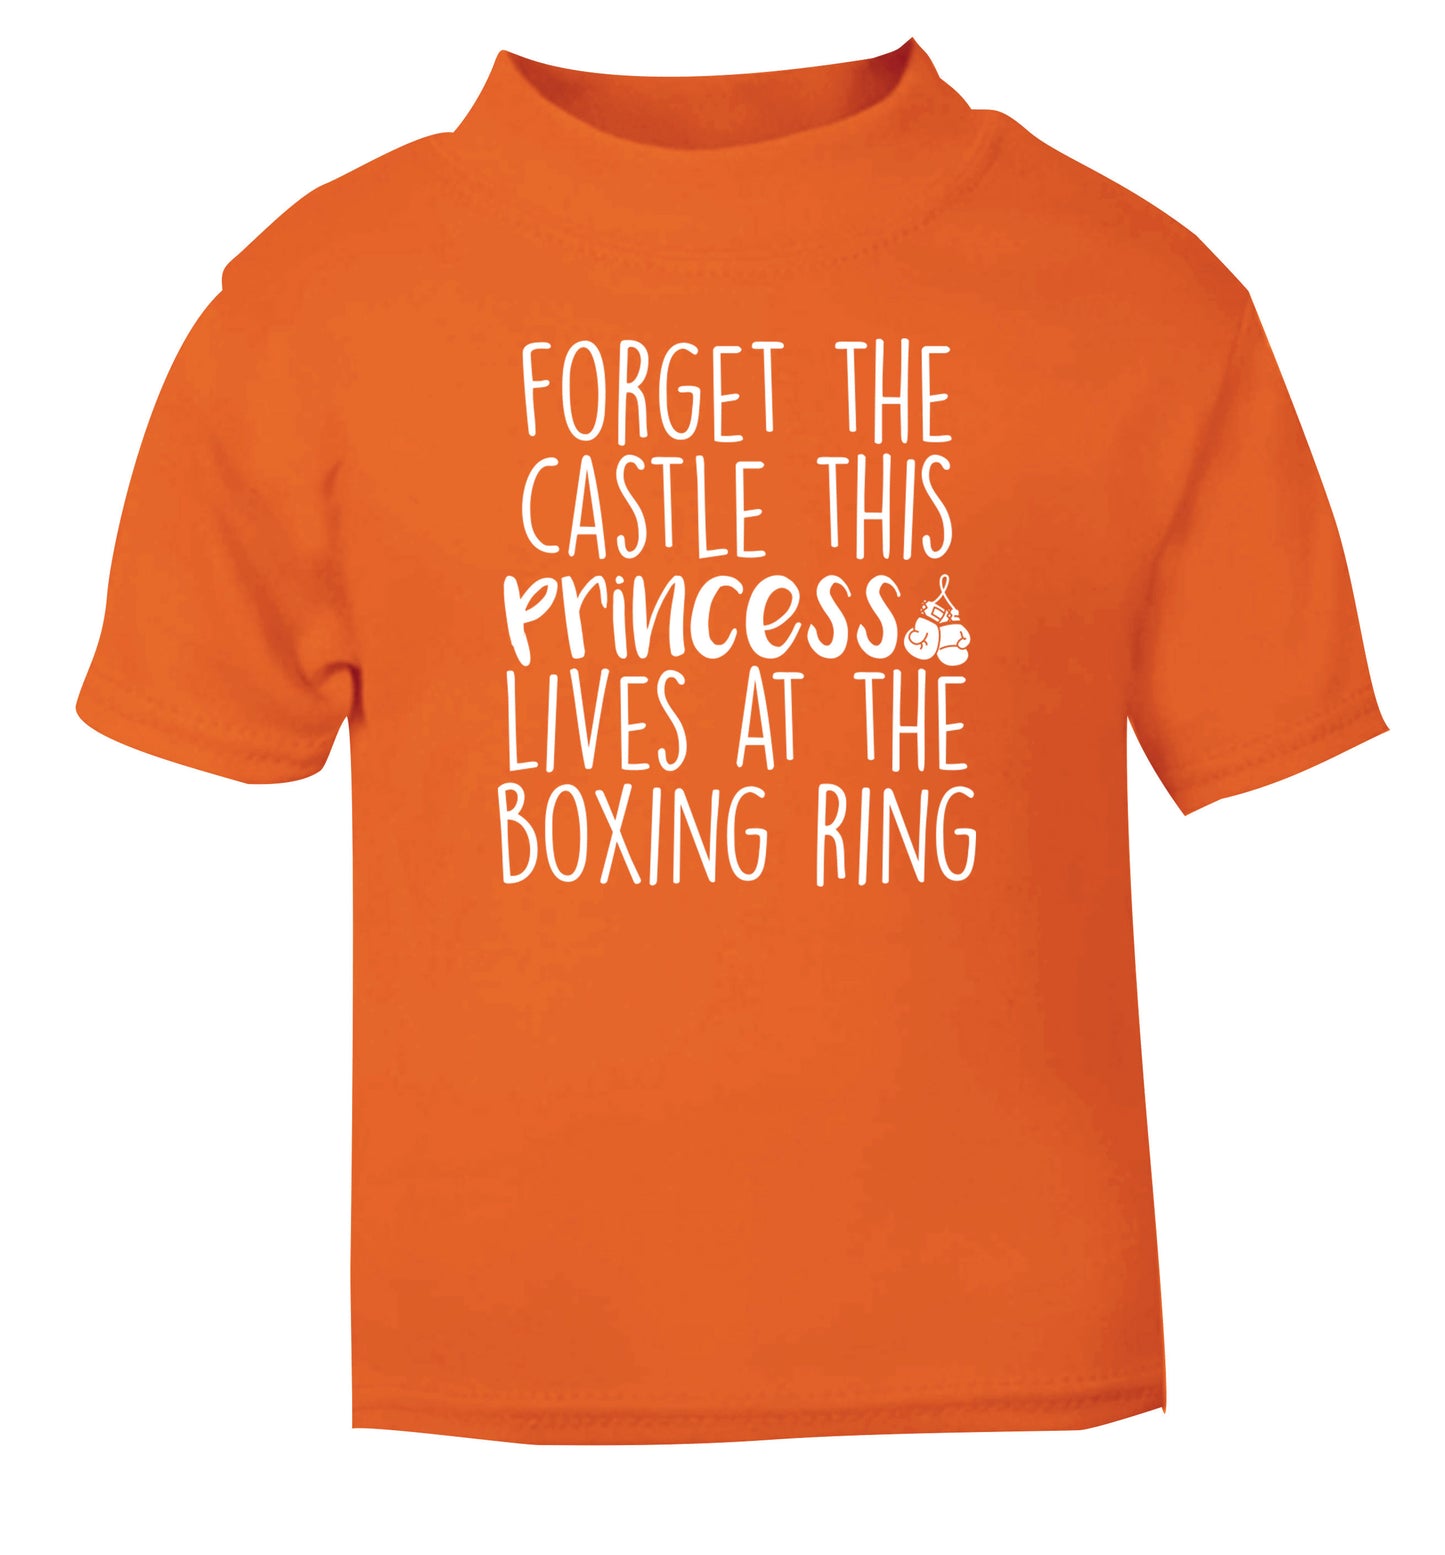 Forget the castle this princess lives at the boxing ring orange Baby Toddler Tshirt 2 Years